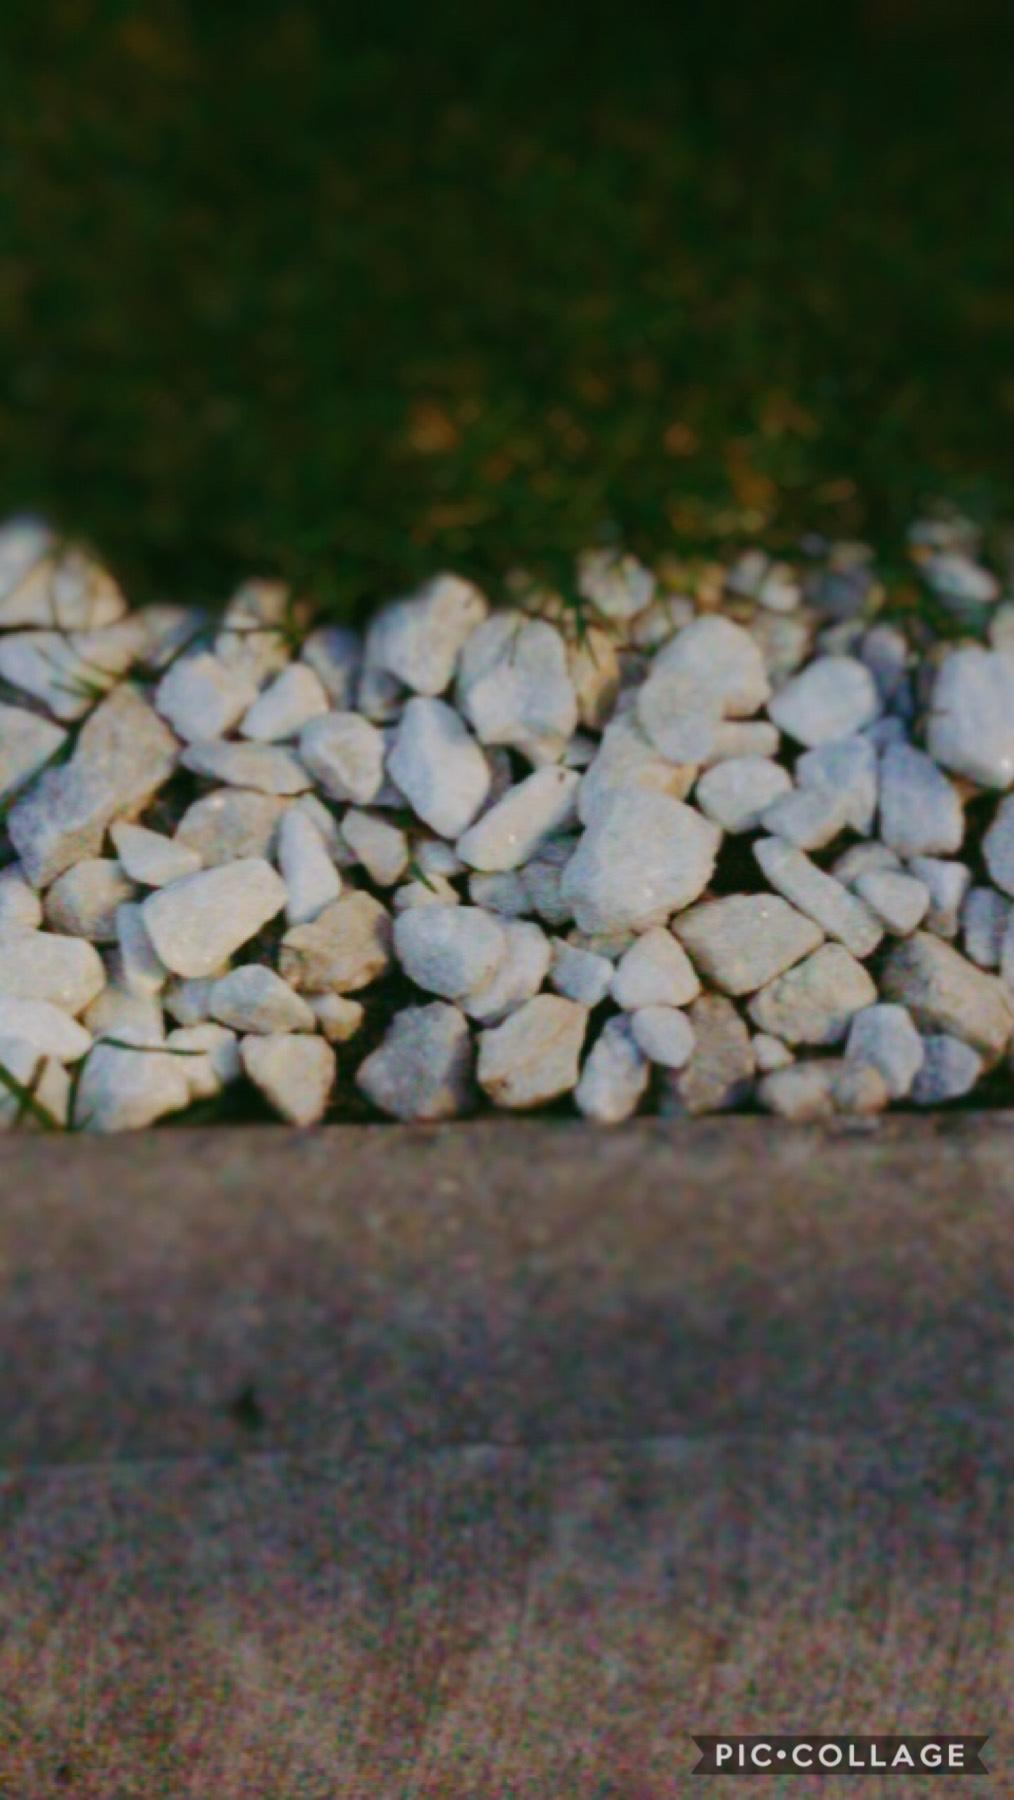 Beautiful combo of the grass, pebbles And pavement.